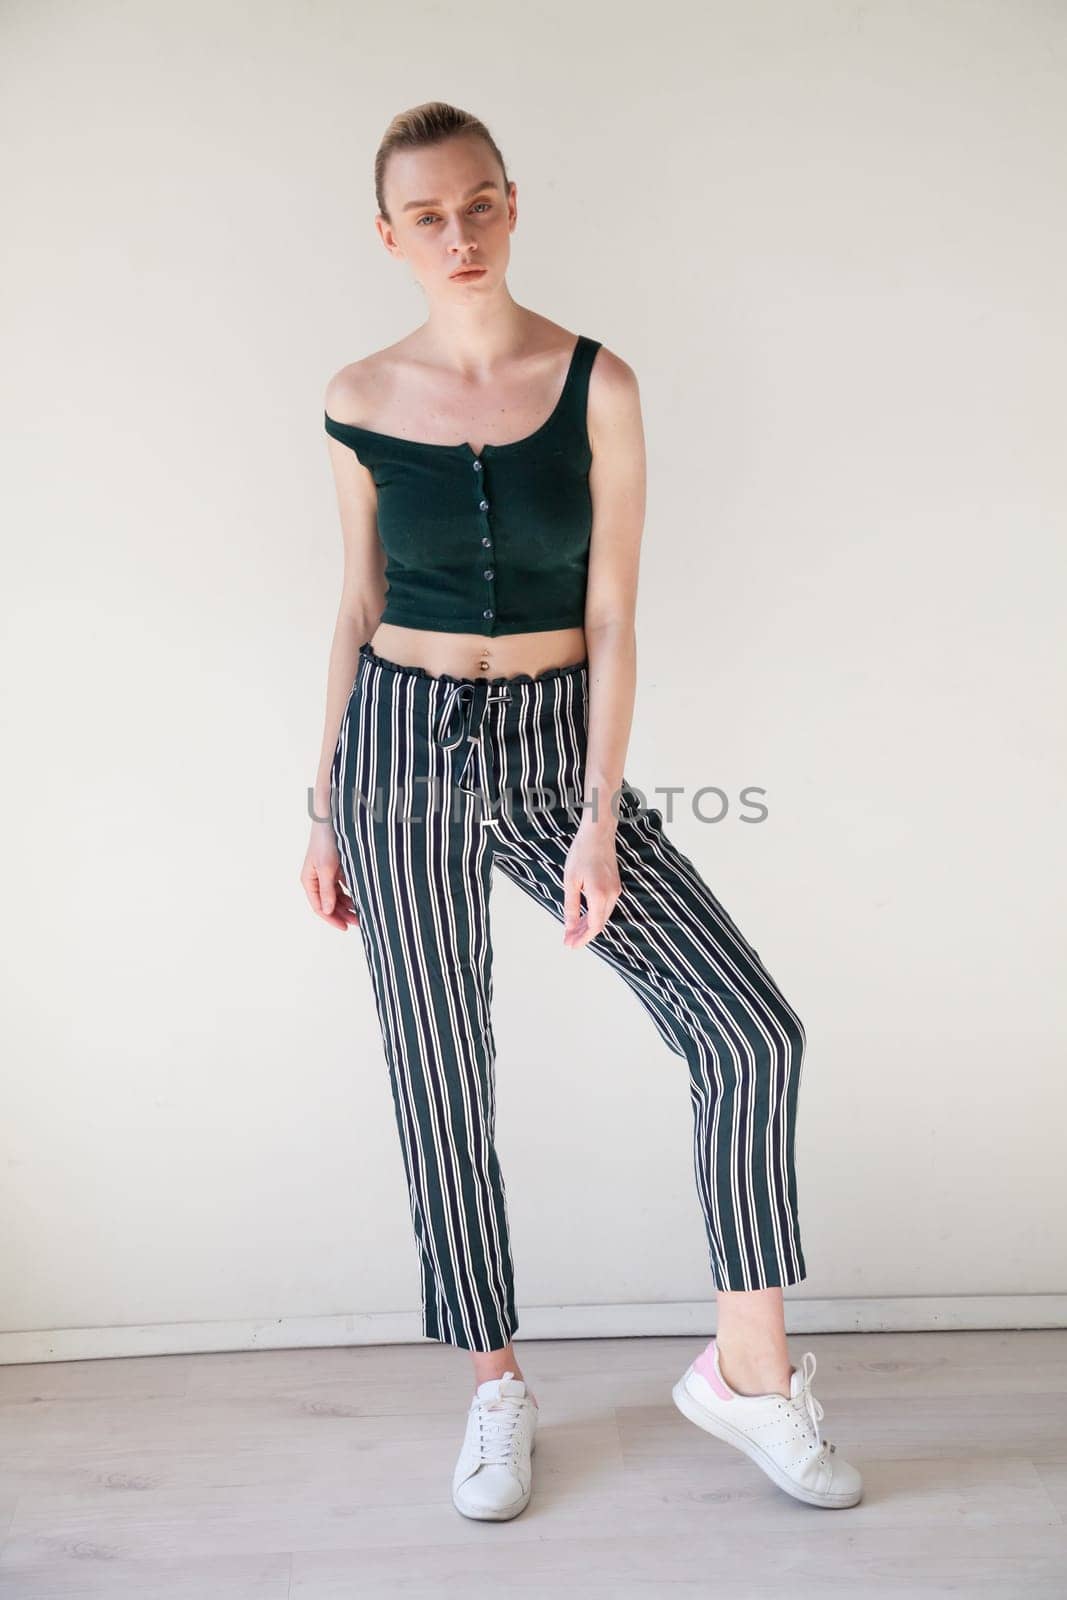 Portrait of a beautiful blonde woman in striped pants by Simakov